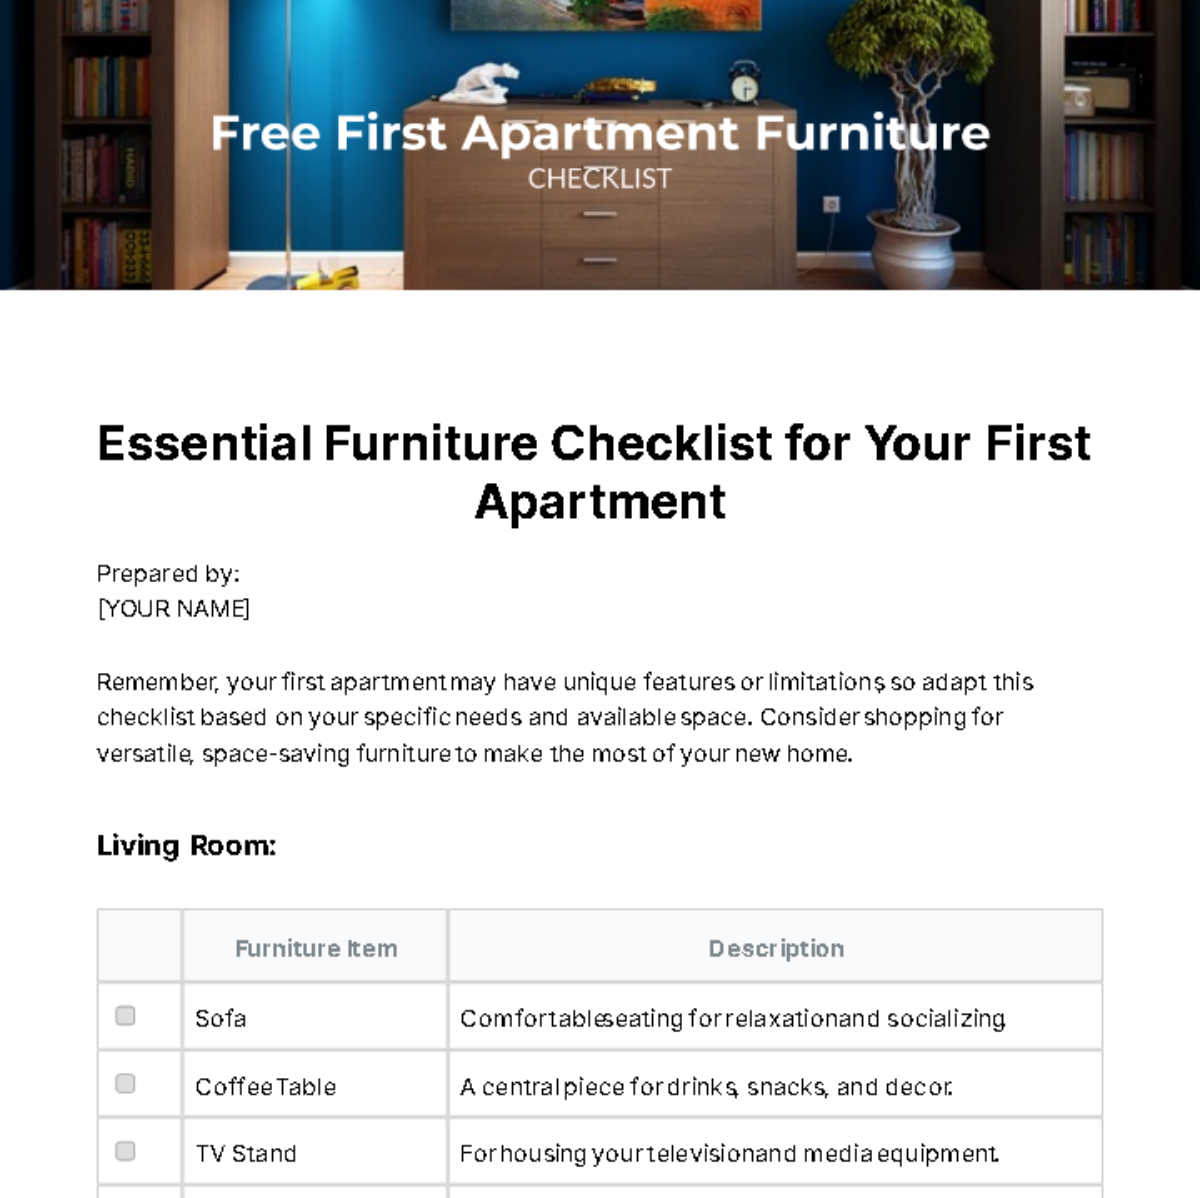 Free First Apartment Furniture Checklist Template